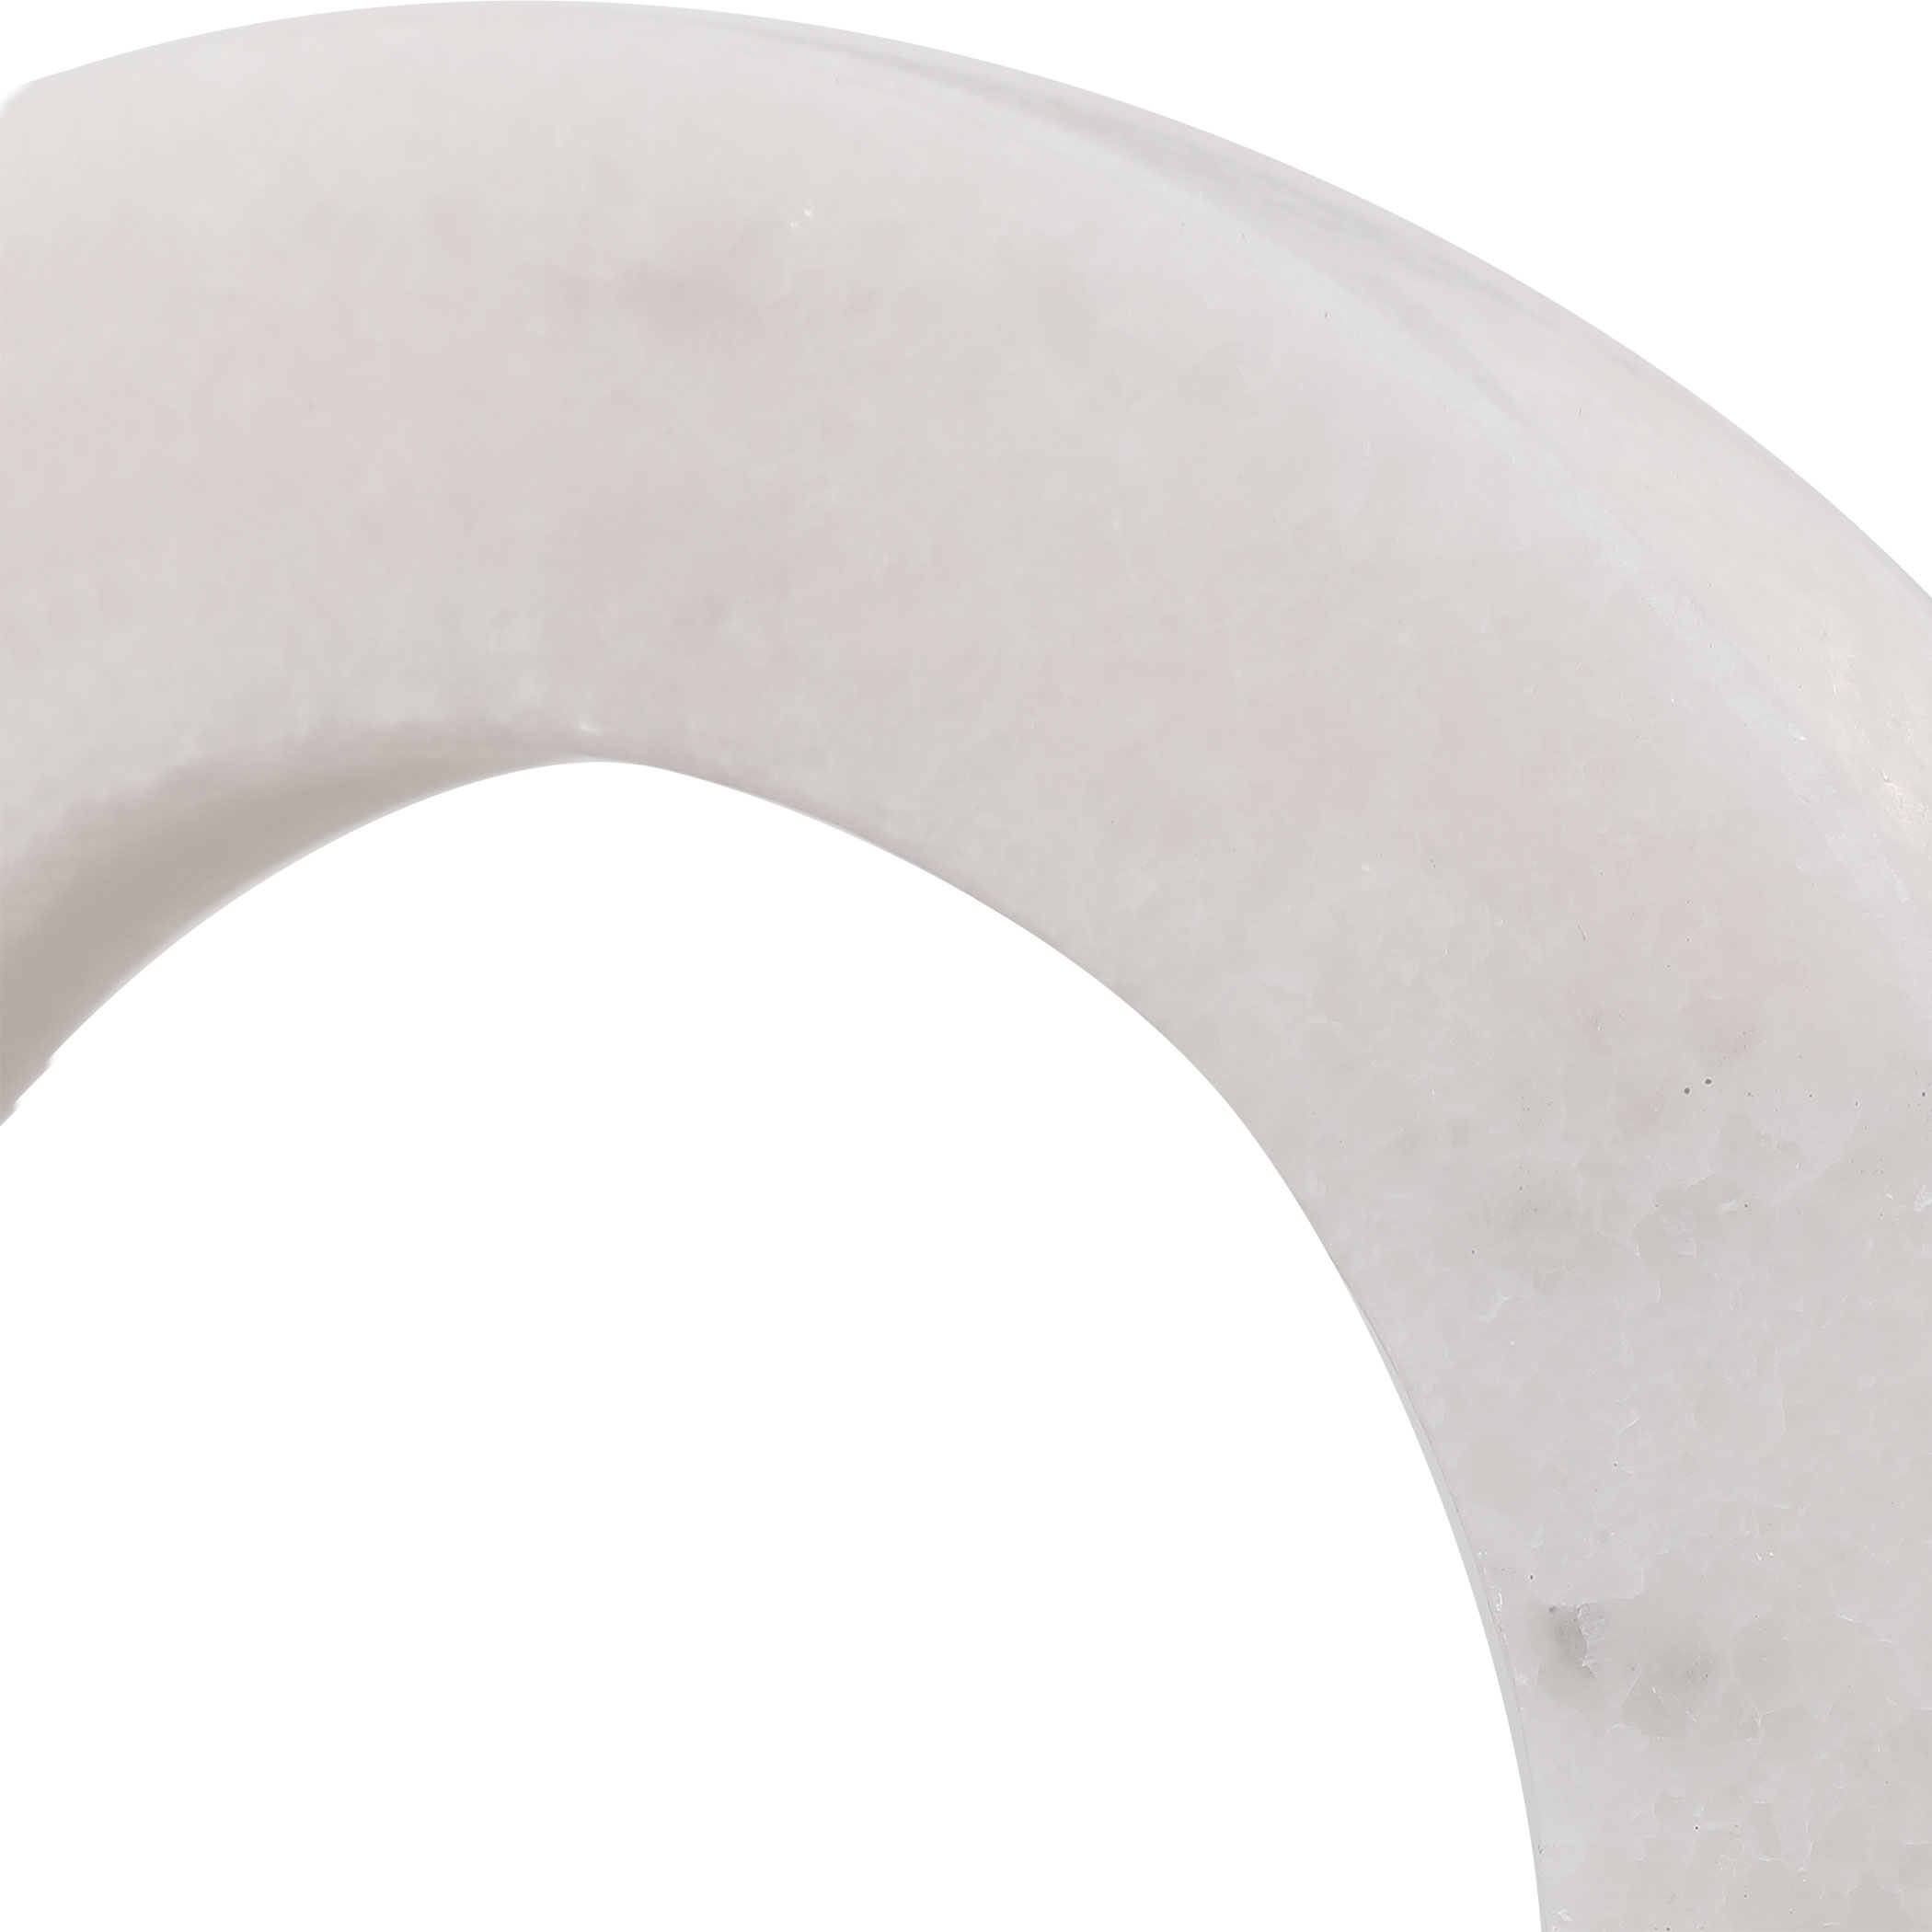 Coin Toss Marble Rings, S/3 - Image 2